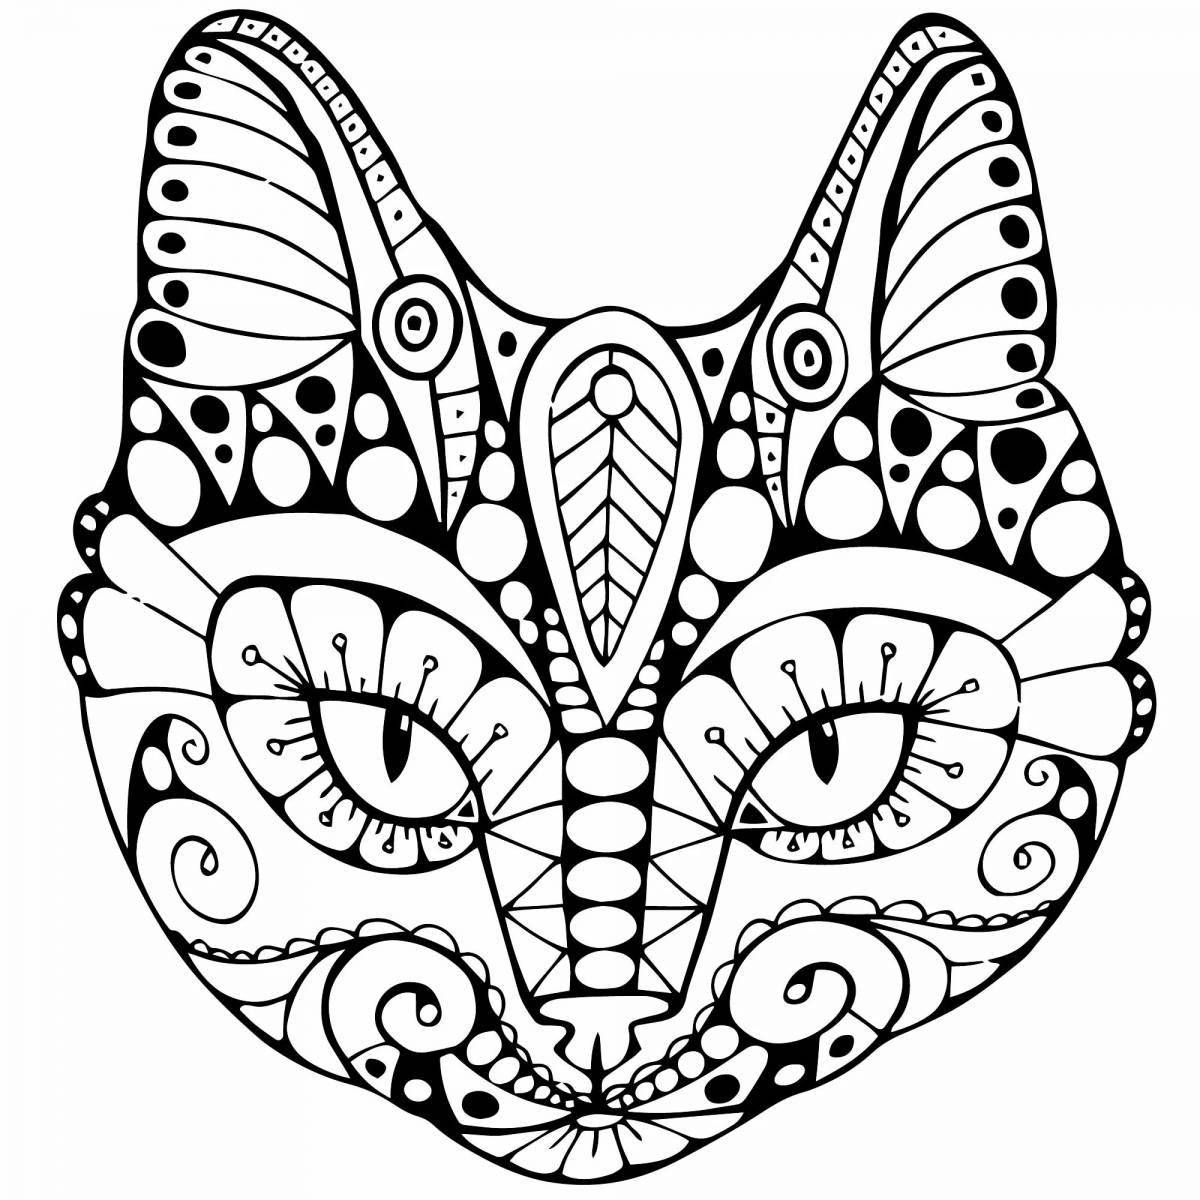 Colorful anti-stress coloring book for girls